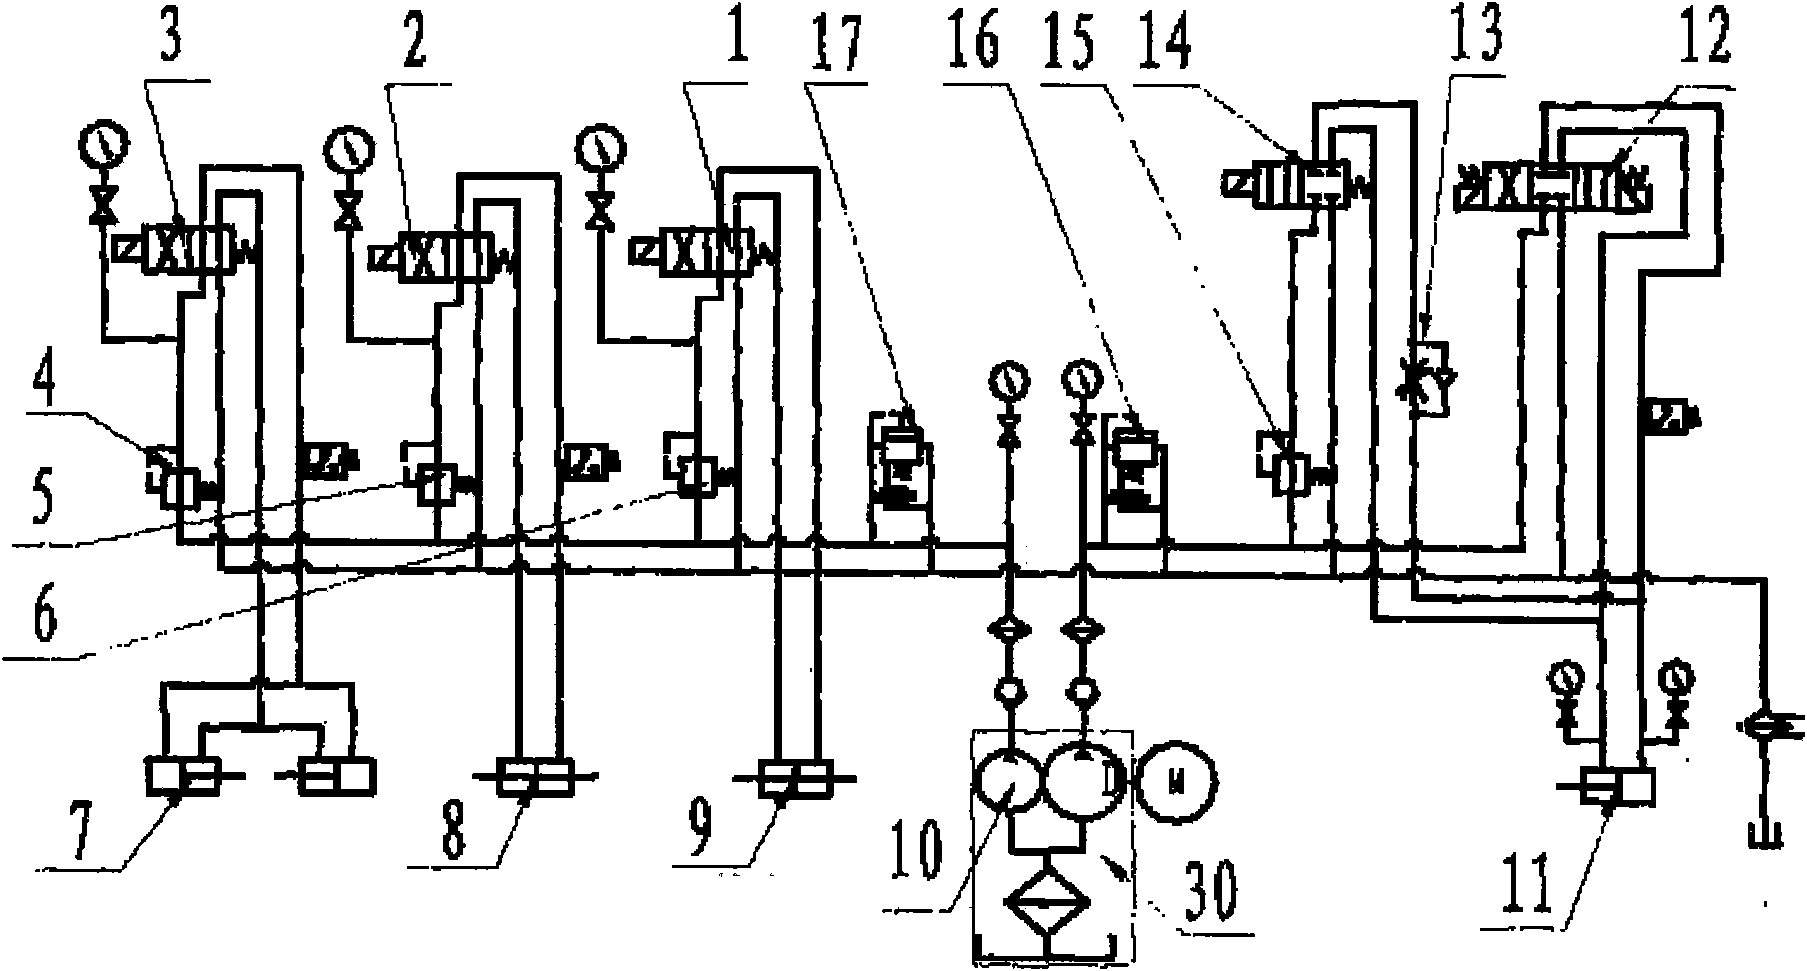 Hydraulic control system of friction welding machine